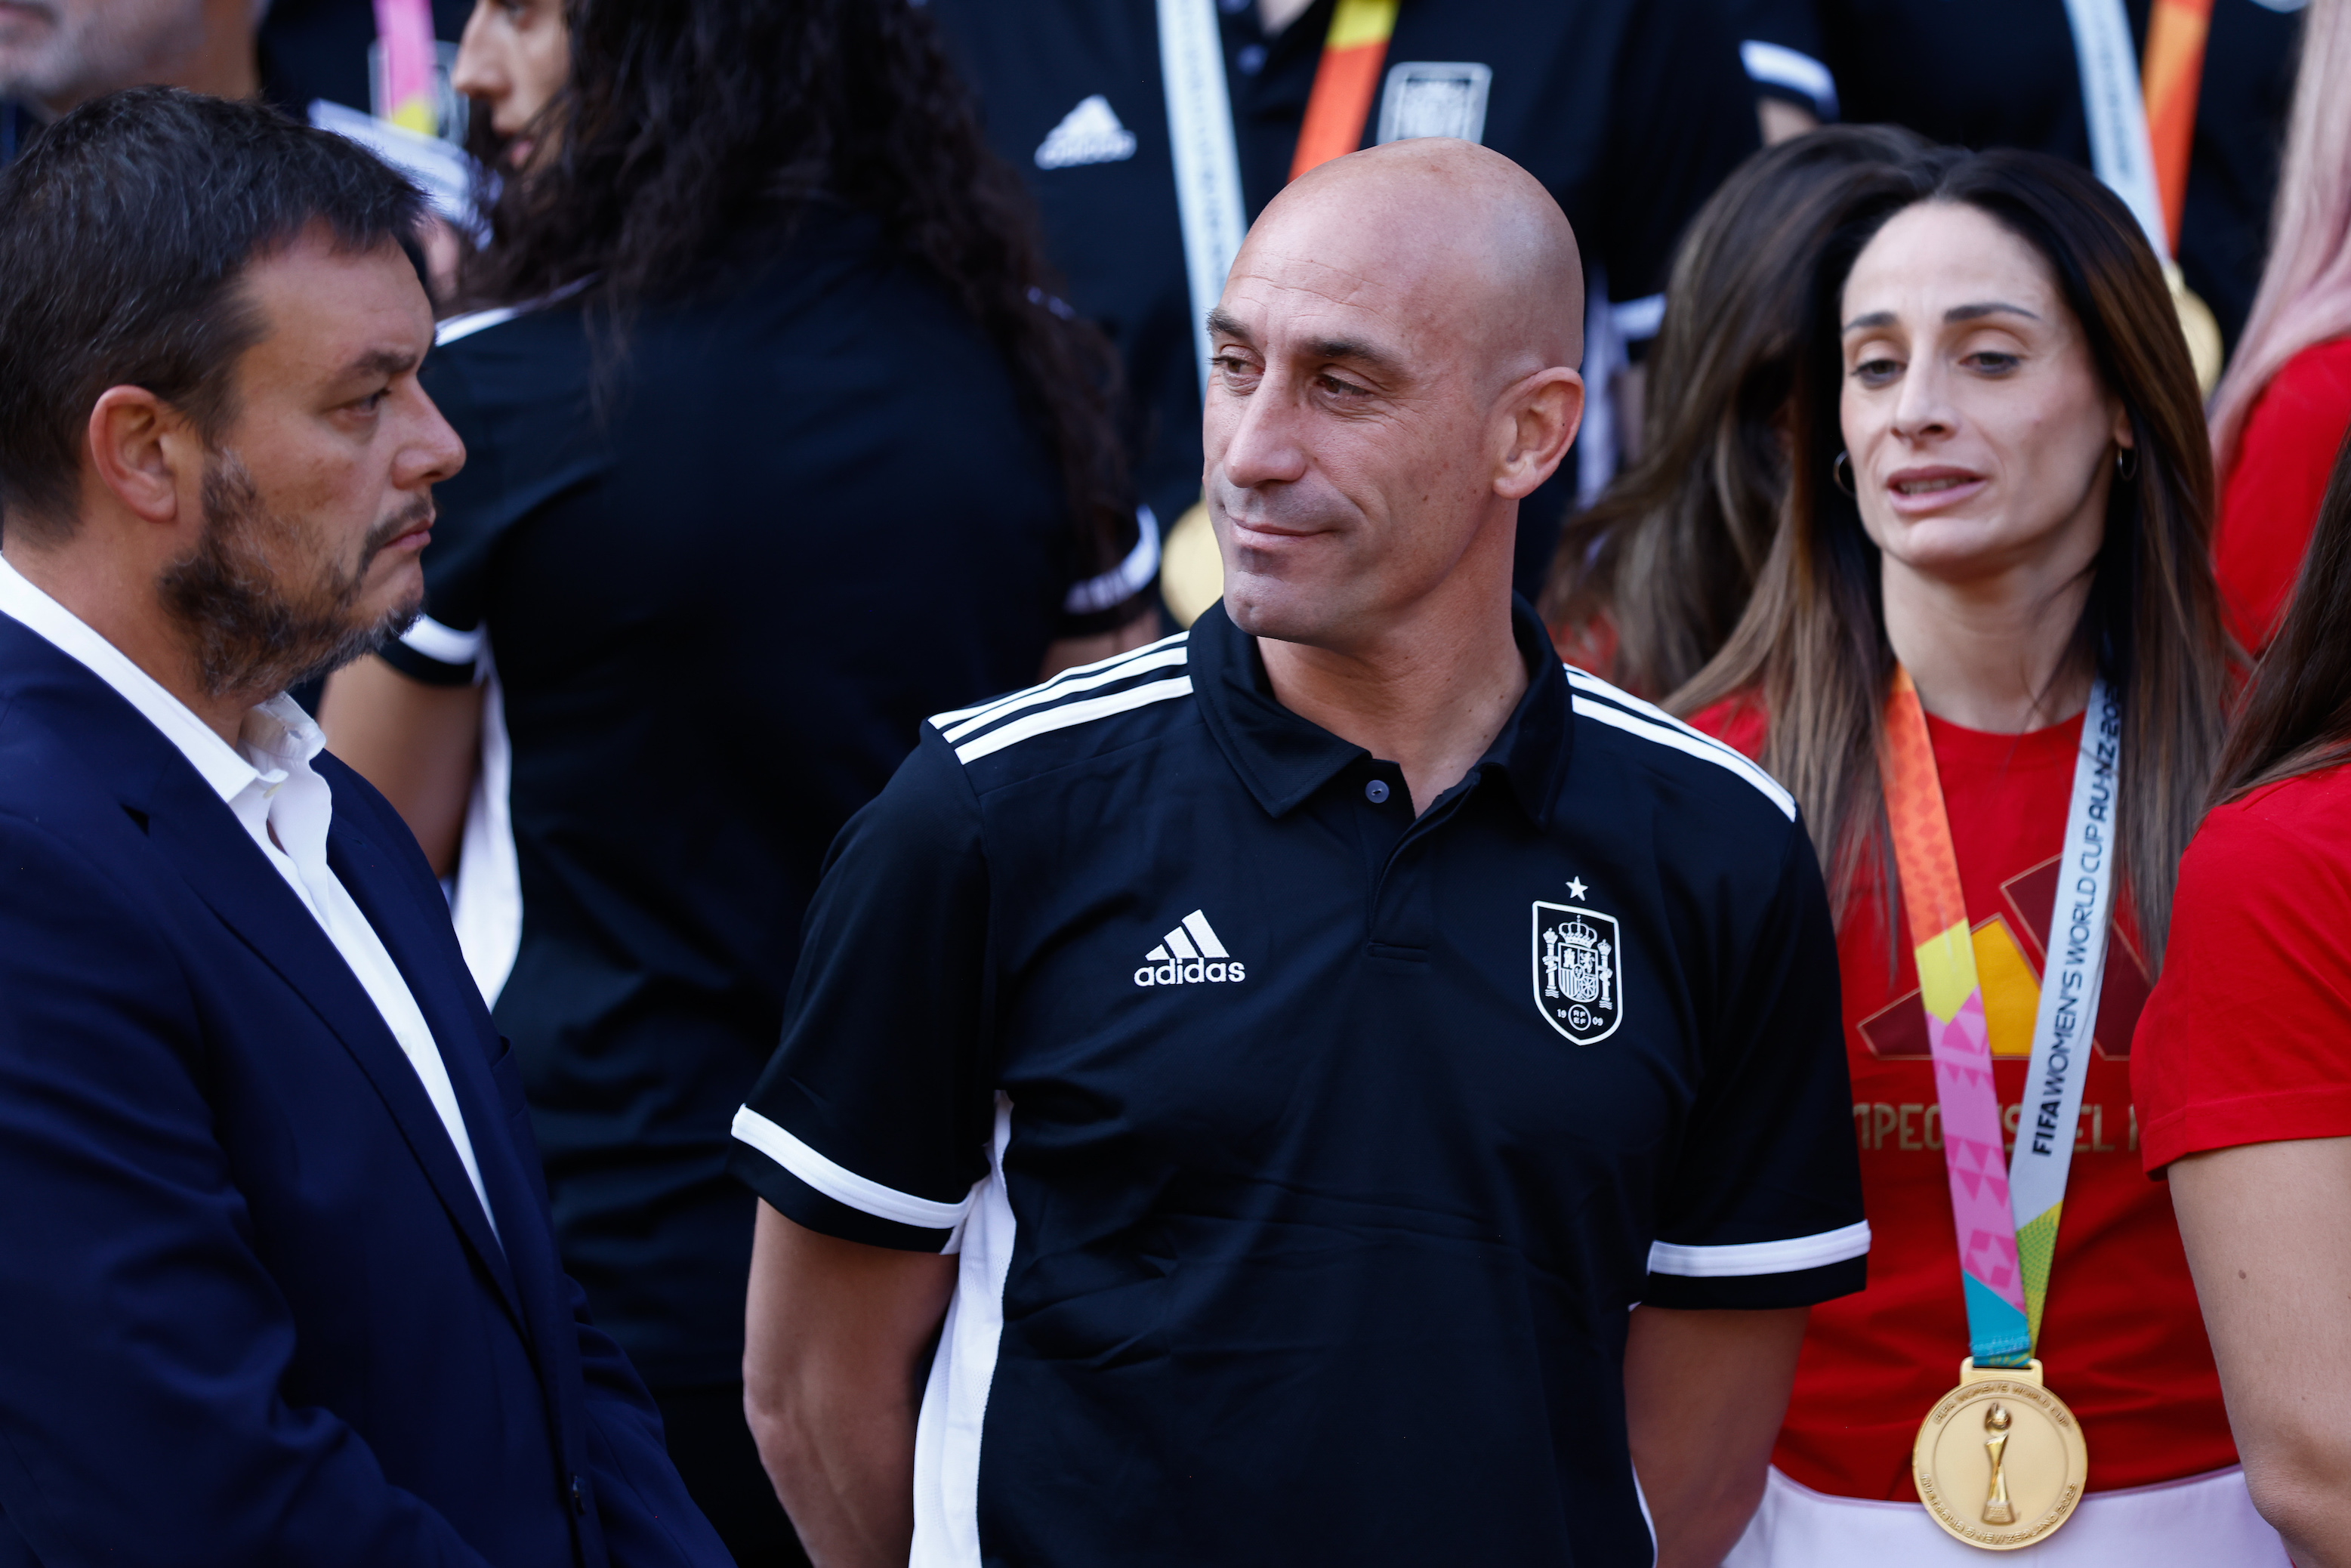 Victor Francos at left and RFEF chief Luis Rubiales, smirking in the center, at a reception following the Spanish women's team's triumph in the 2023 Women's World Cup.